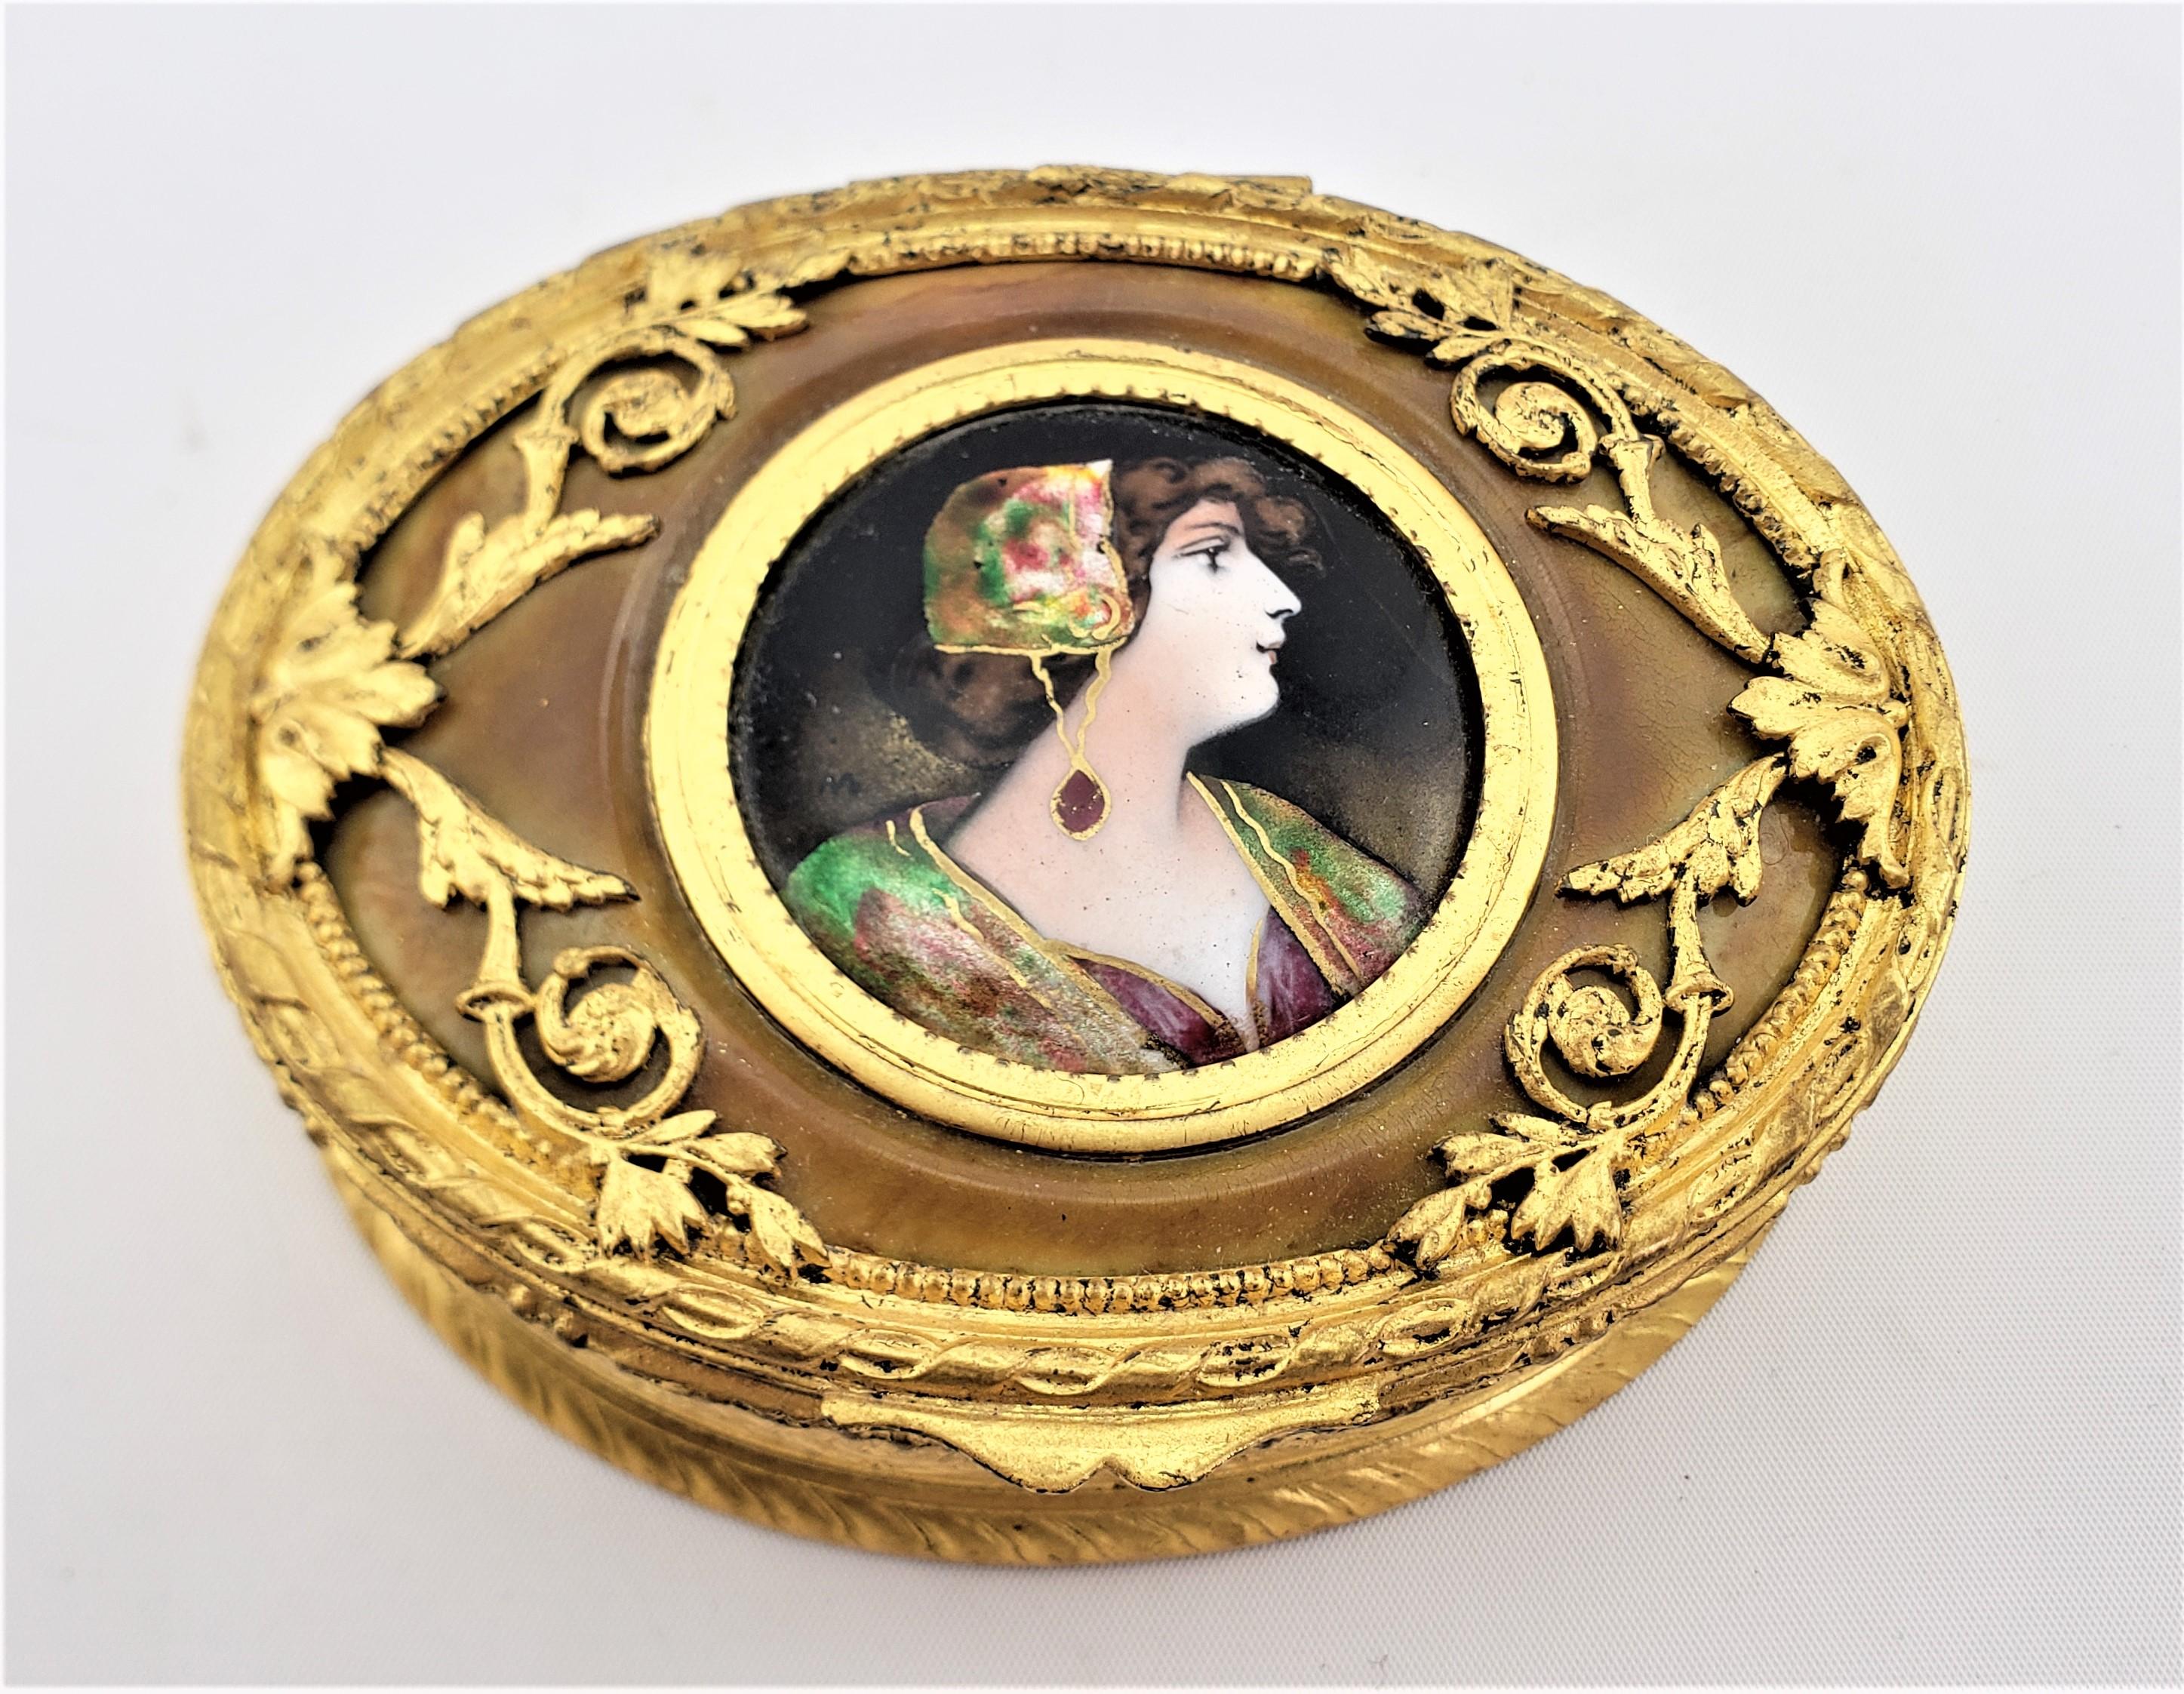 This antique dresser or jewelry box is unsigned, but presumed to have been made in France in approximately 1890 in the period Art Nouveau style. The oval shaped box has a very well executed hand-painted enamel portrait, likely on copper, in a